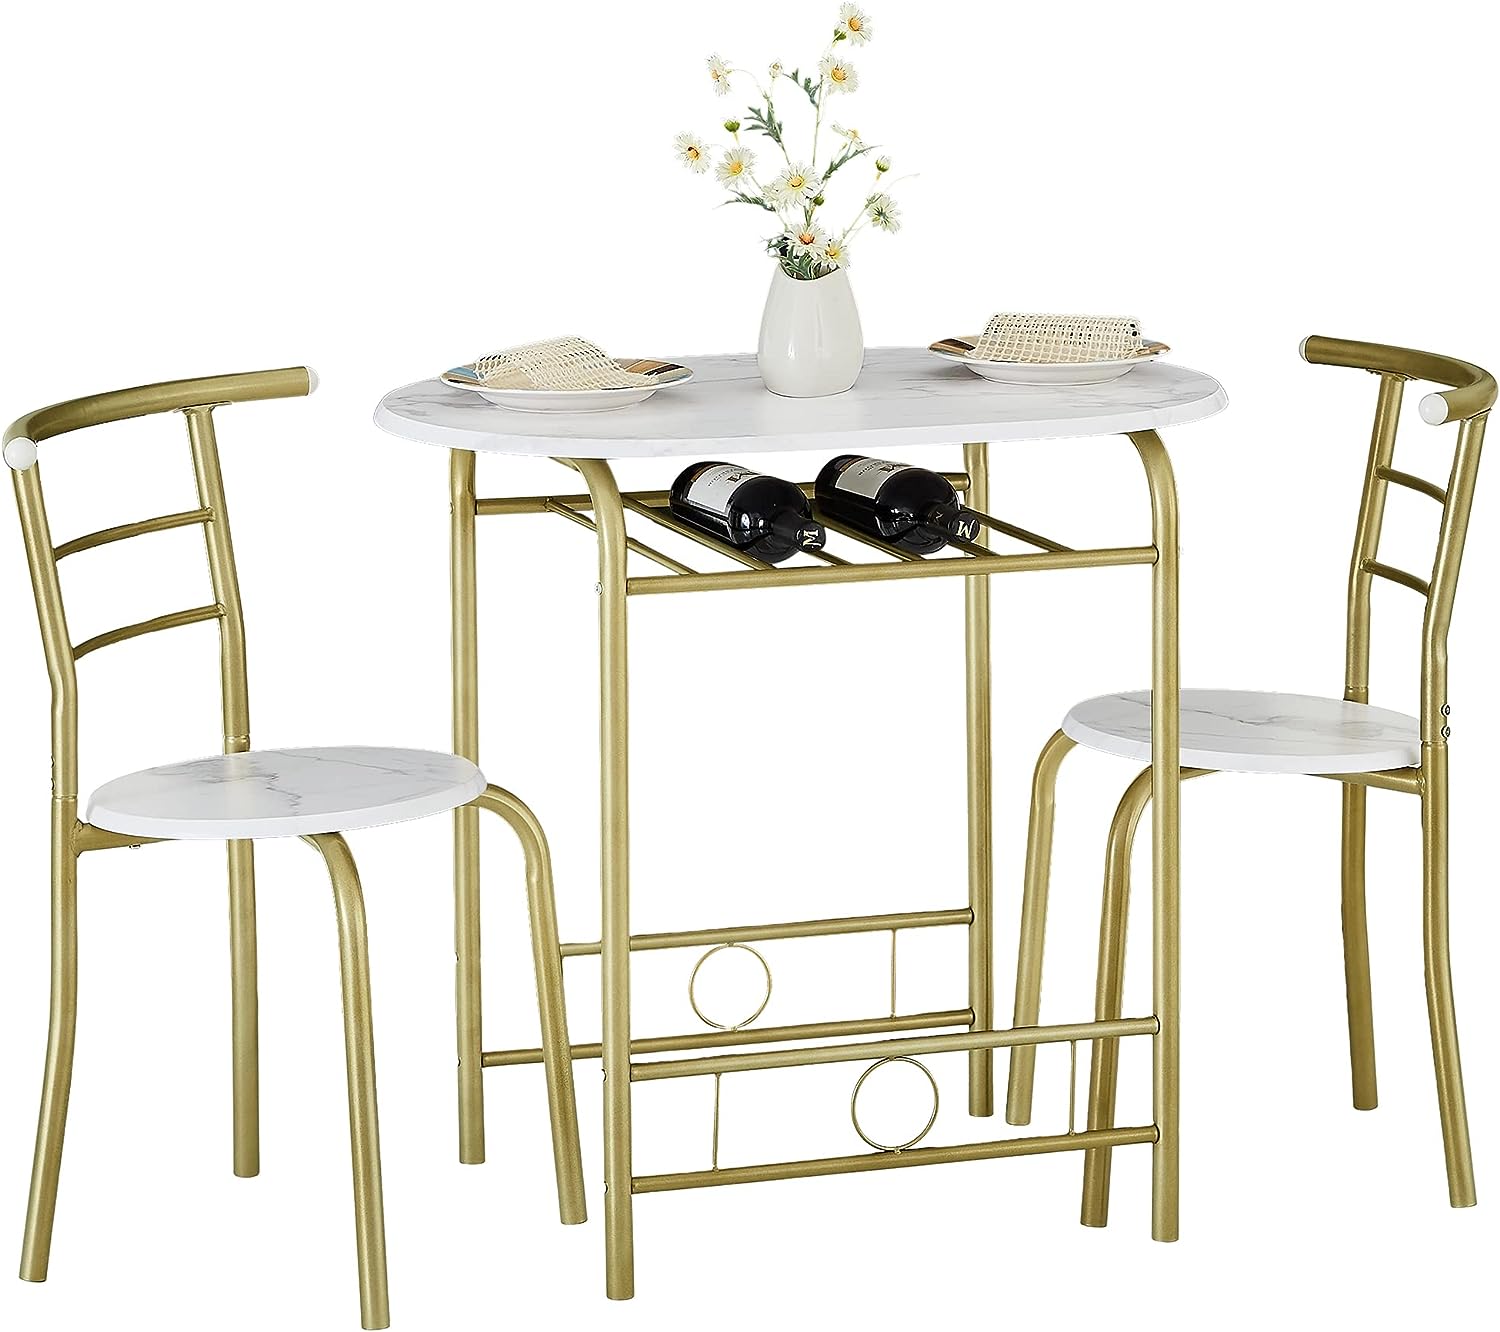 VECELO 3 Piece Small Round Dining Table Set for Kitchen Breakfast Nook, Wood Grain Tabletop with Wine Storage Rack, Save Space, 31.5", White & Gold